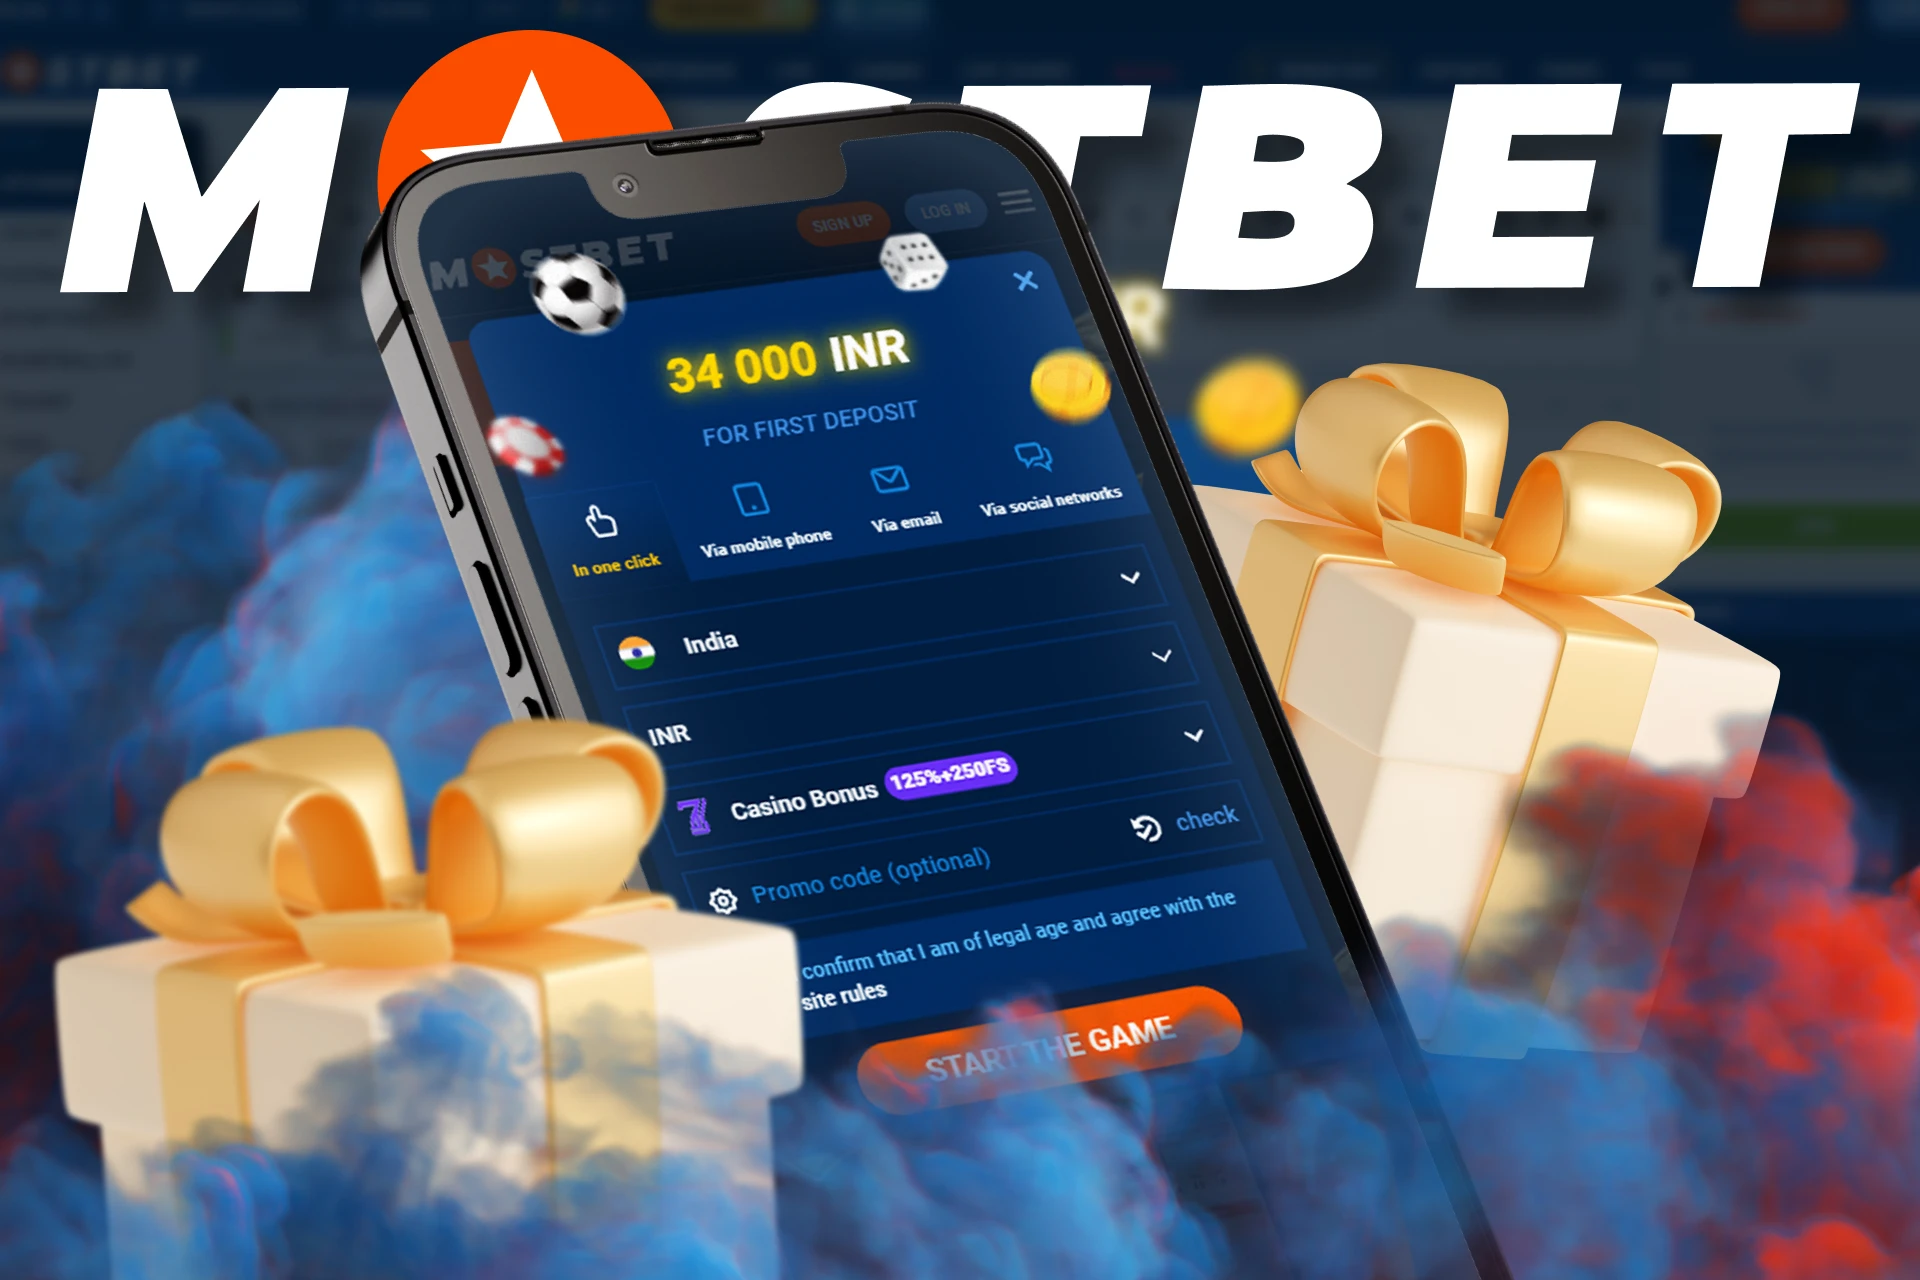 Get up to 125% bonus on your first deposit to bet more and win more.